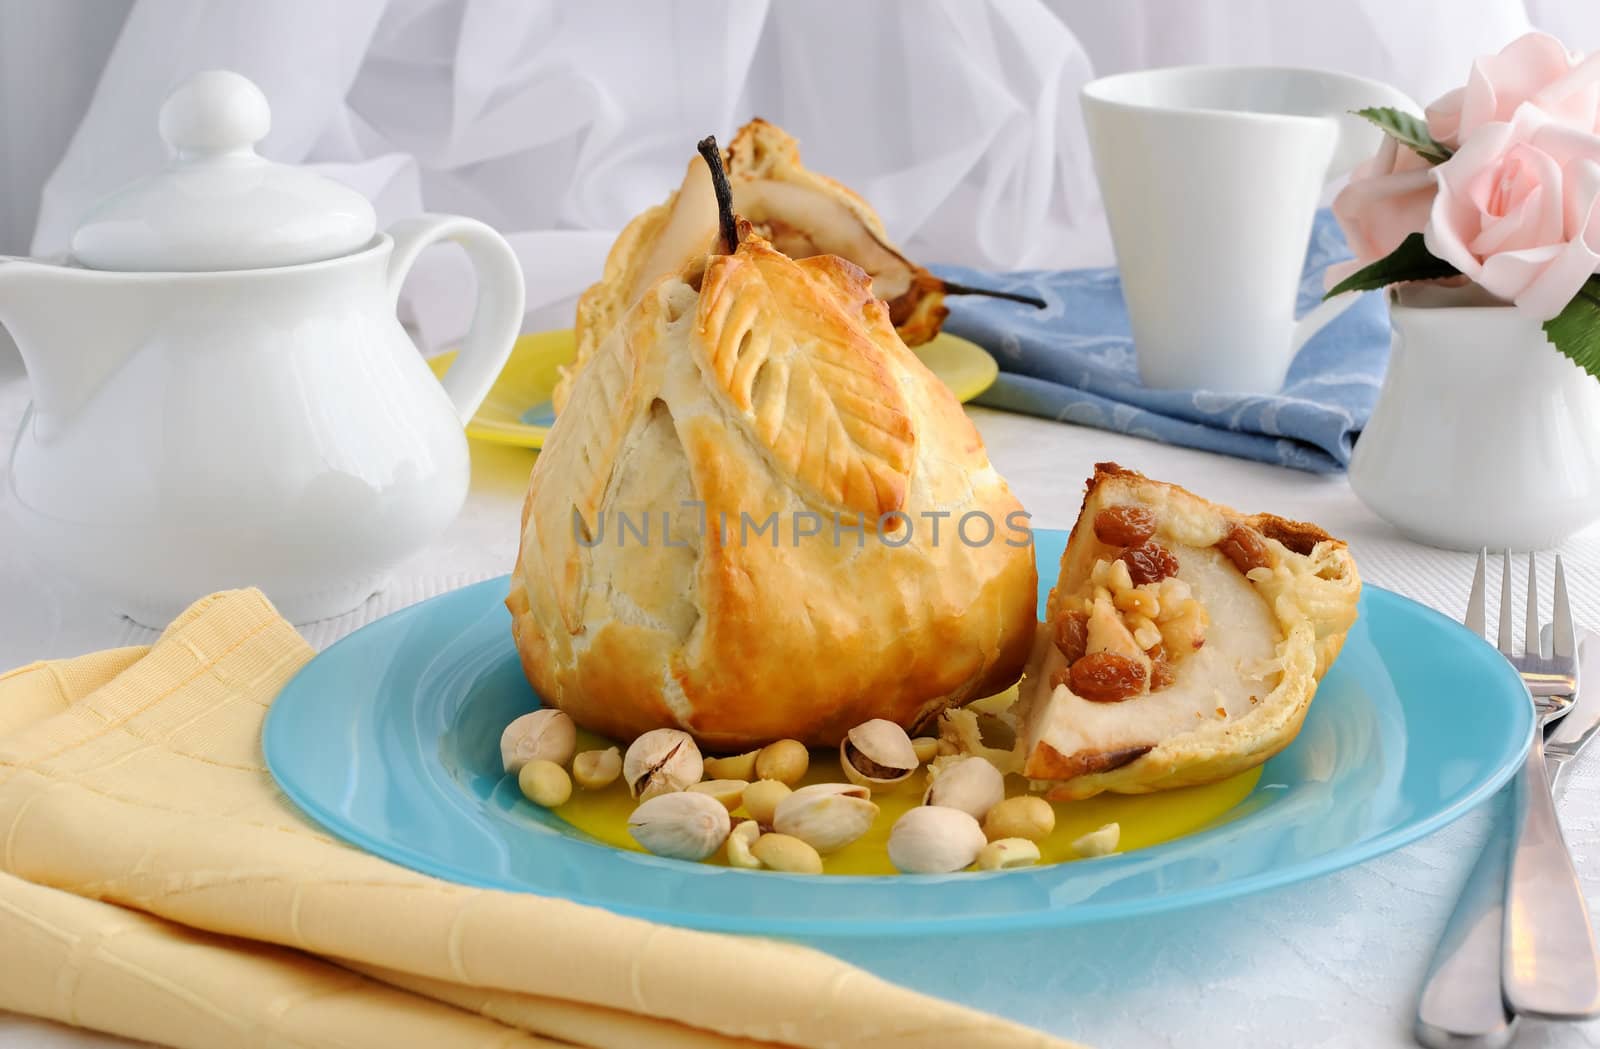  Stuffed with a mixture of nuts and raisins pear in the test by Apolonia